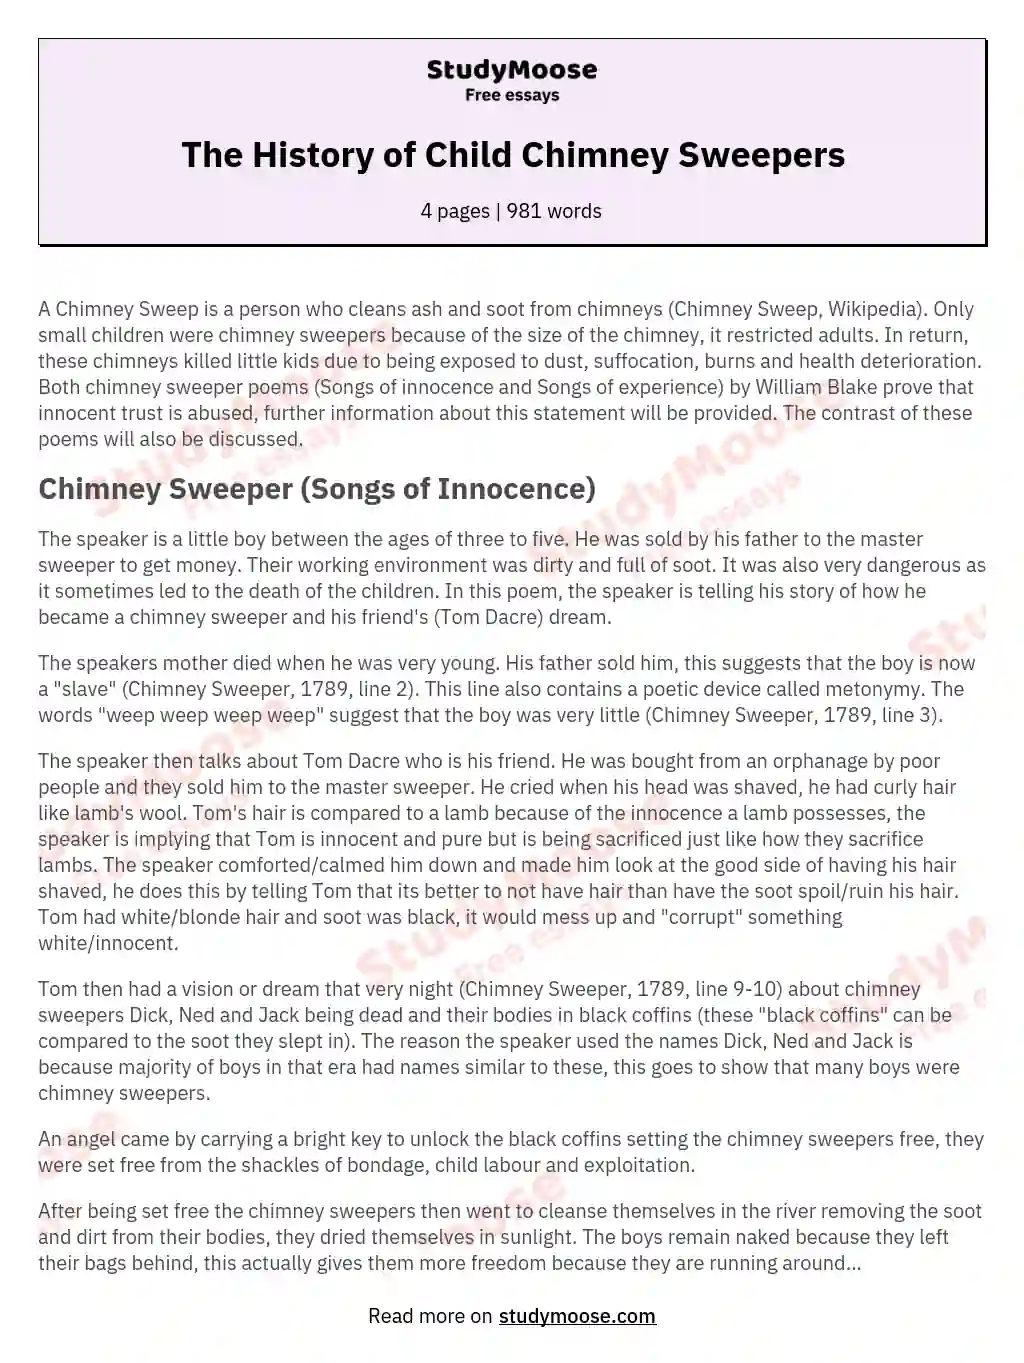 The History of Child Chimney Sweepers essay